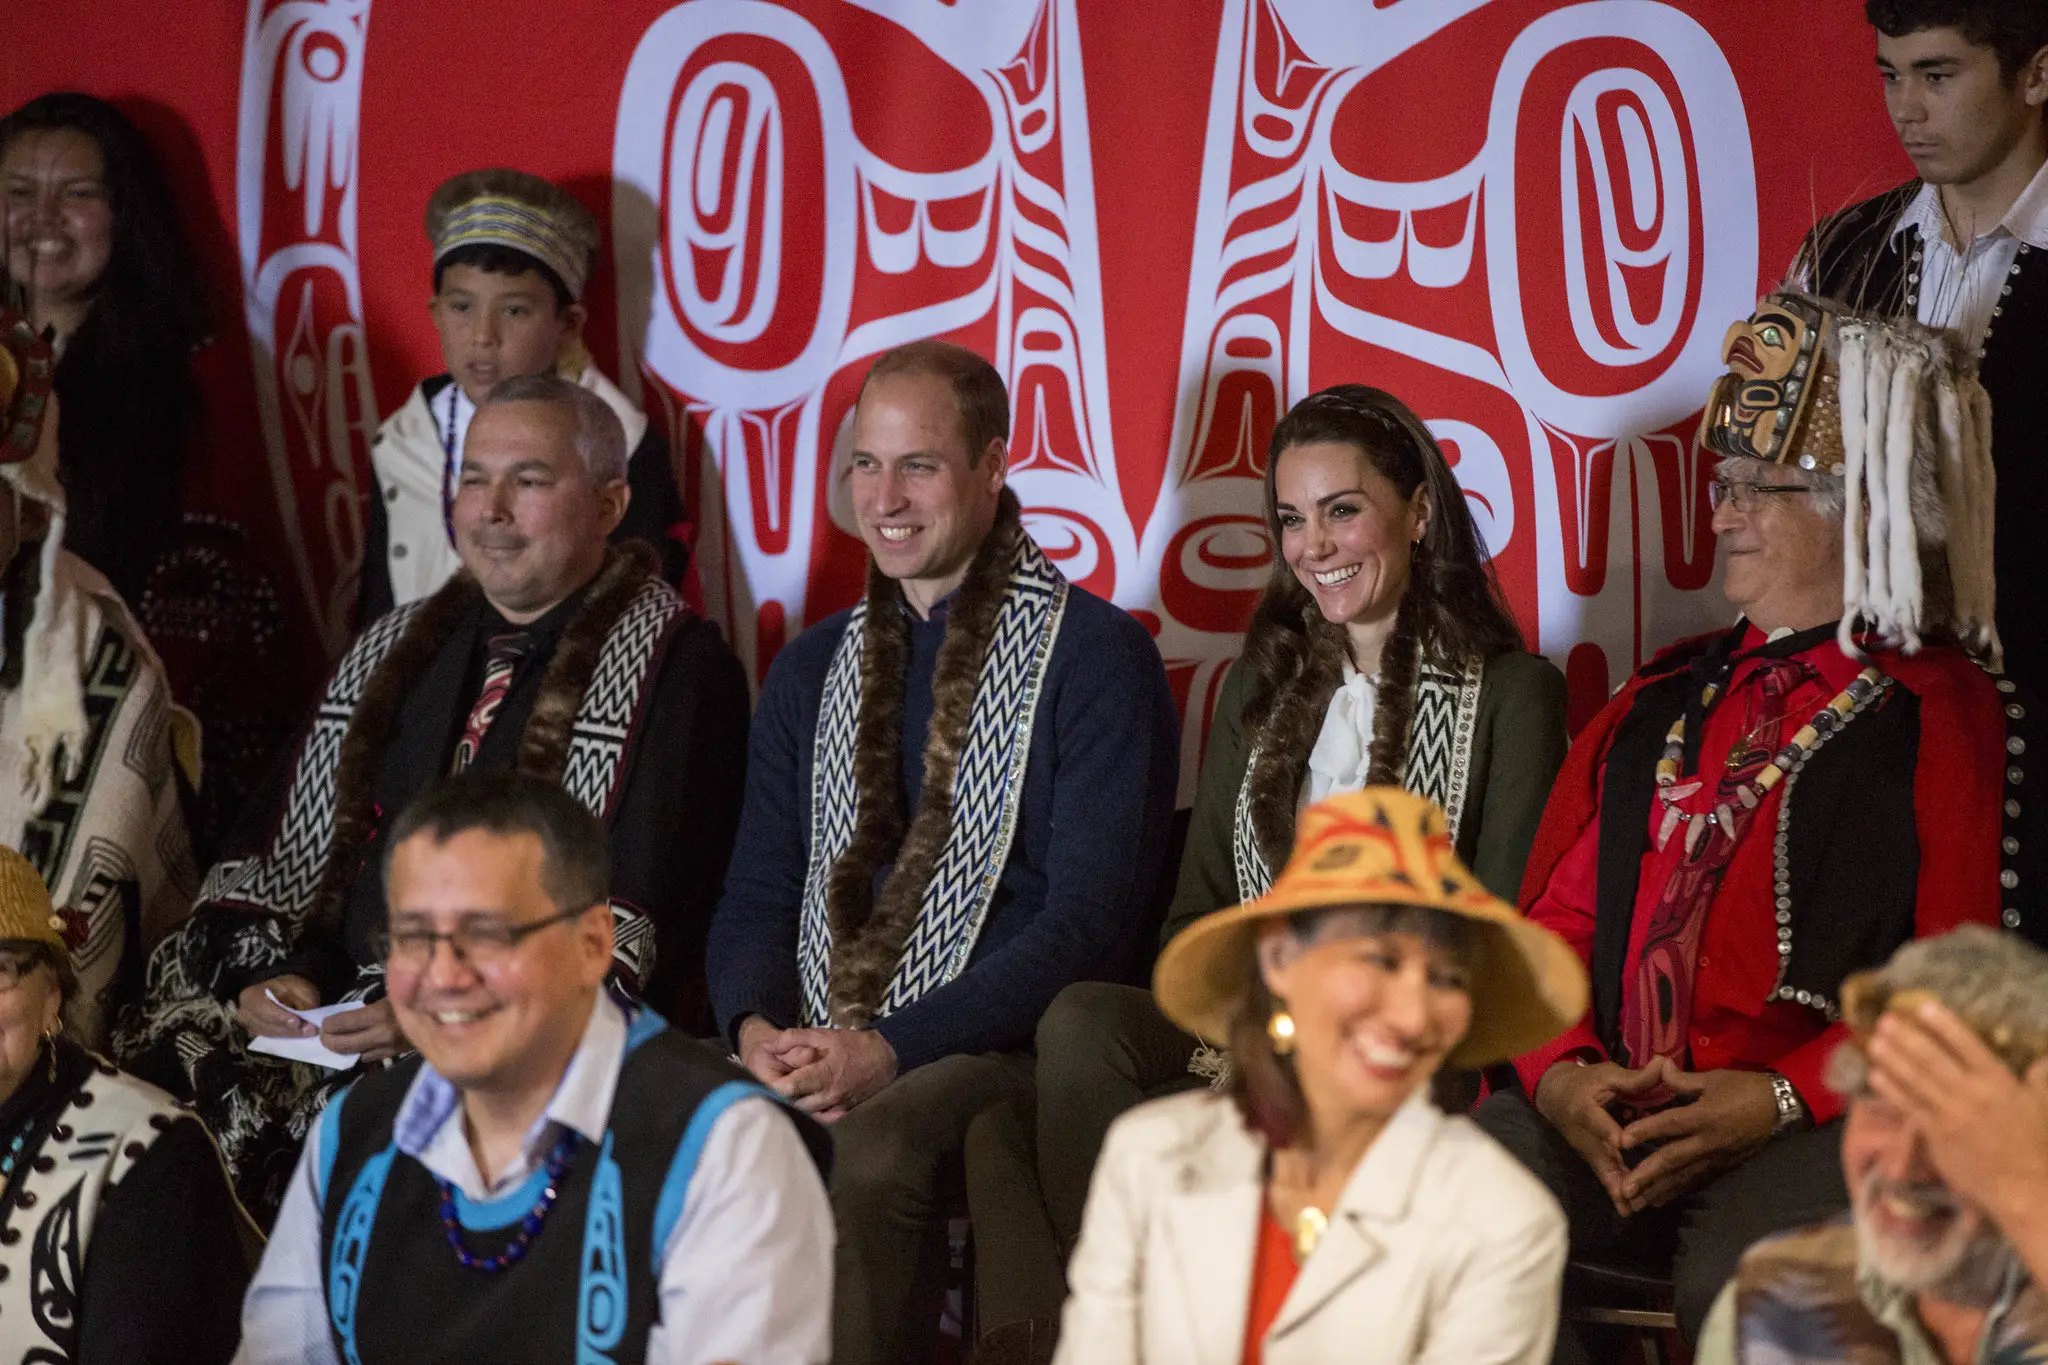 The Duke and Duchess of Cambridge received official welcome in Haida Gwaii